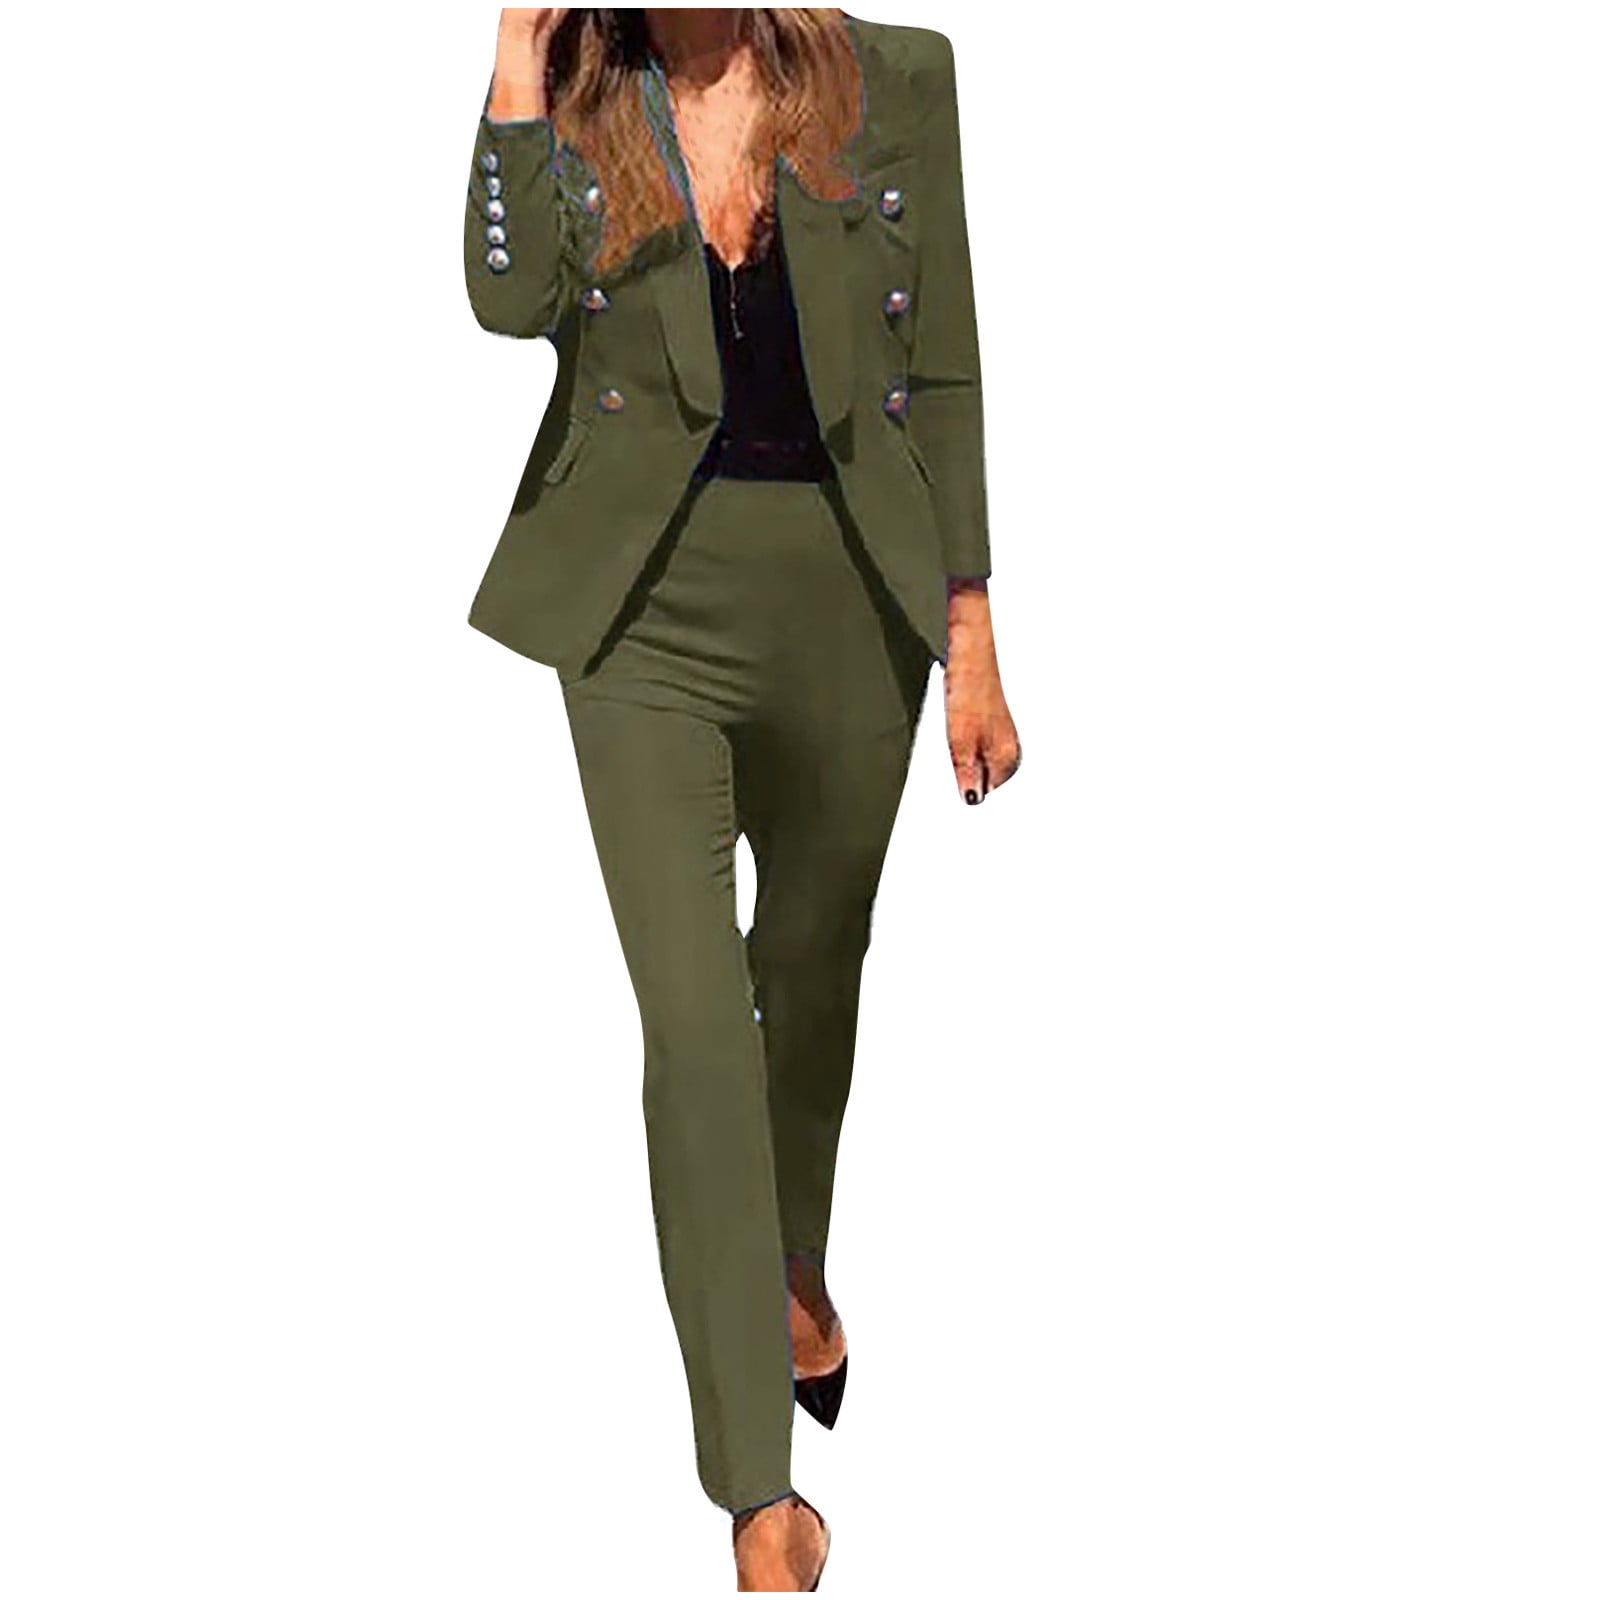 Pant Suits for Women Business Casual Blazer Sets 2 Piece Outfits